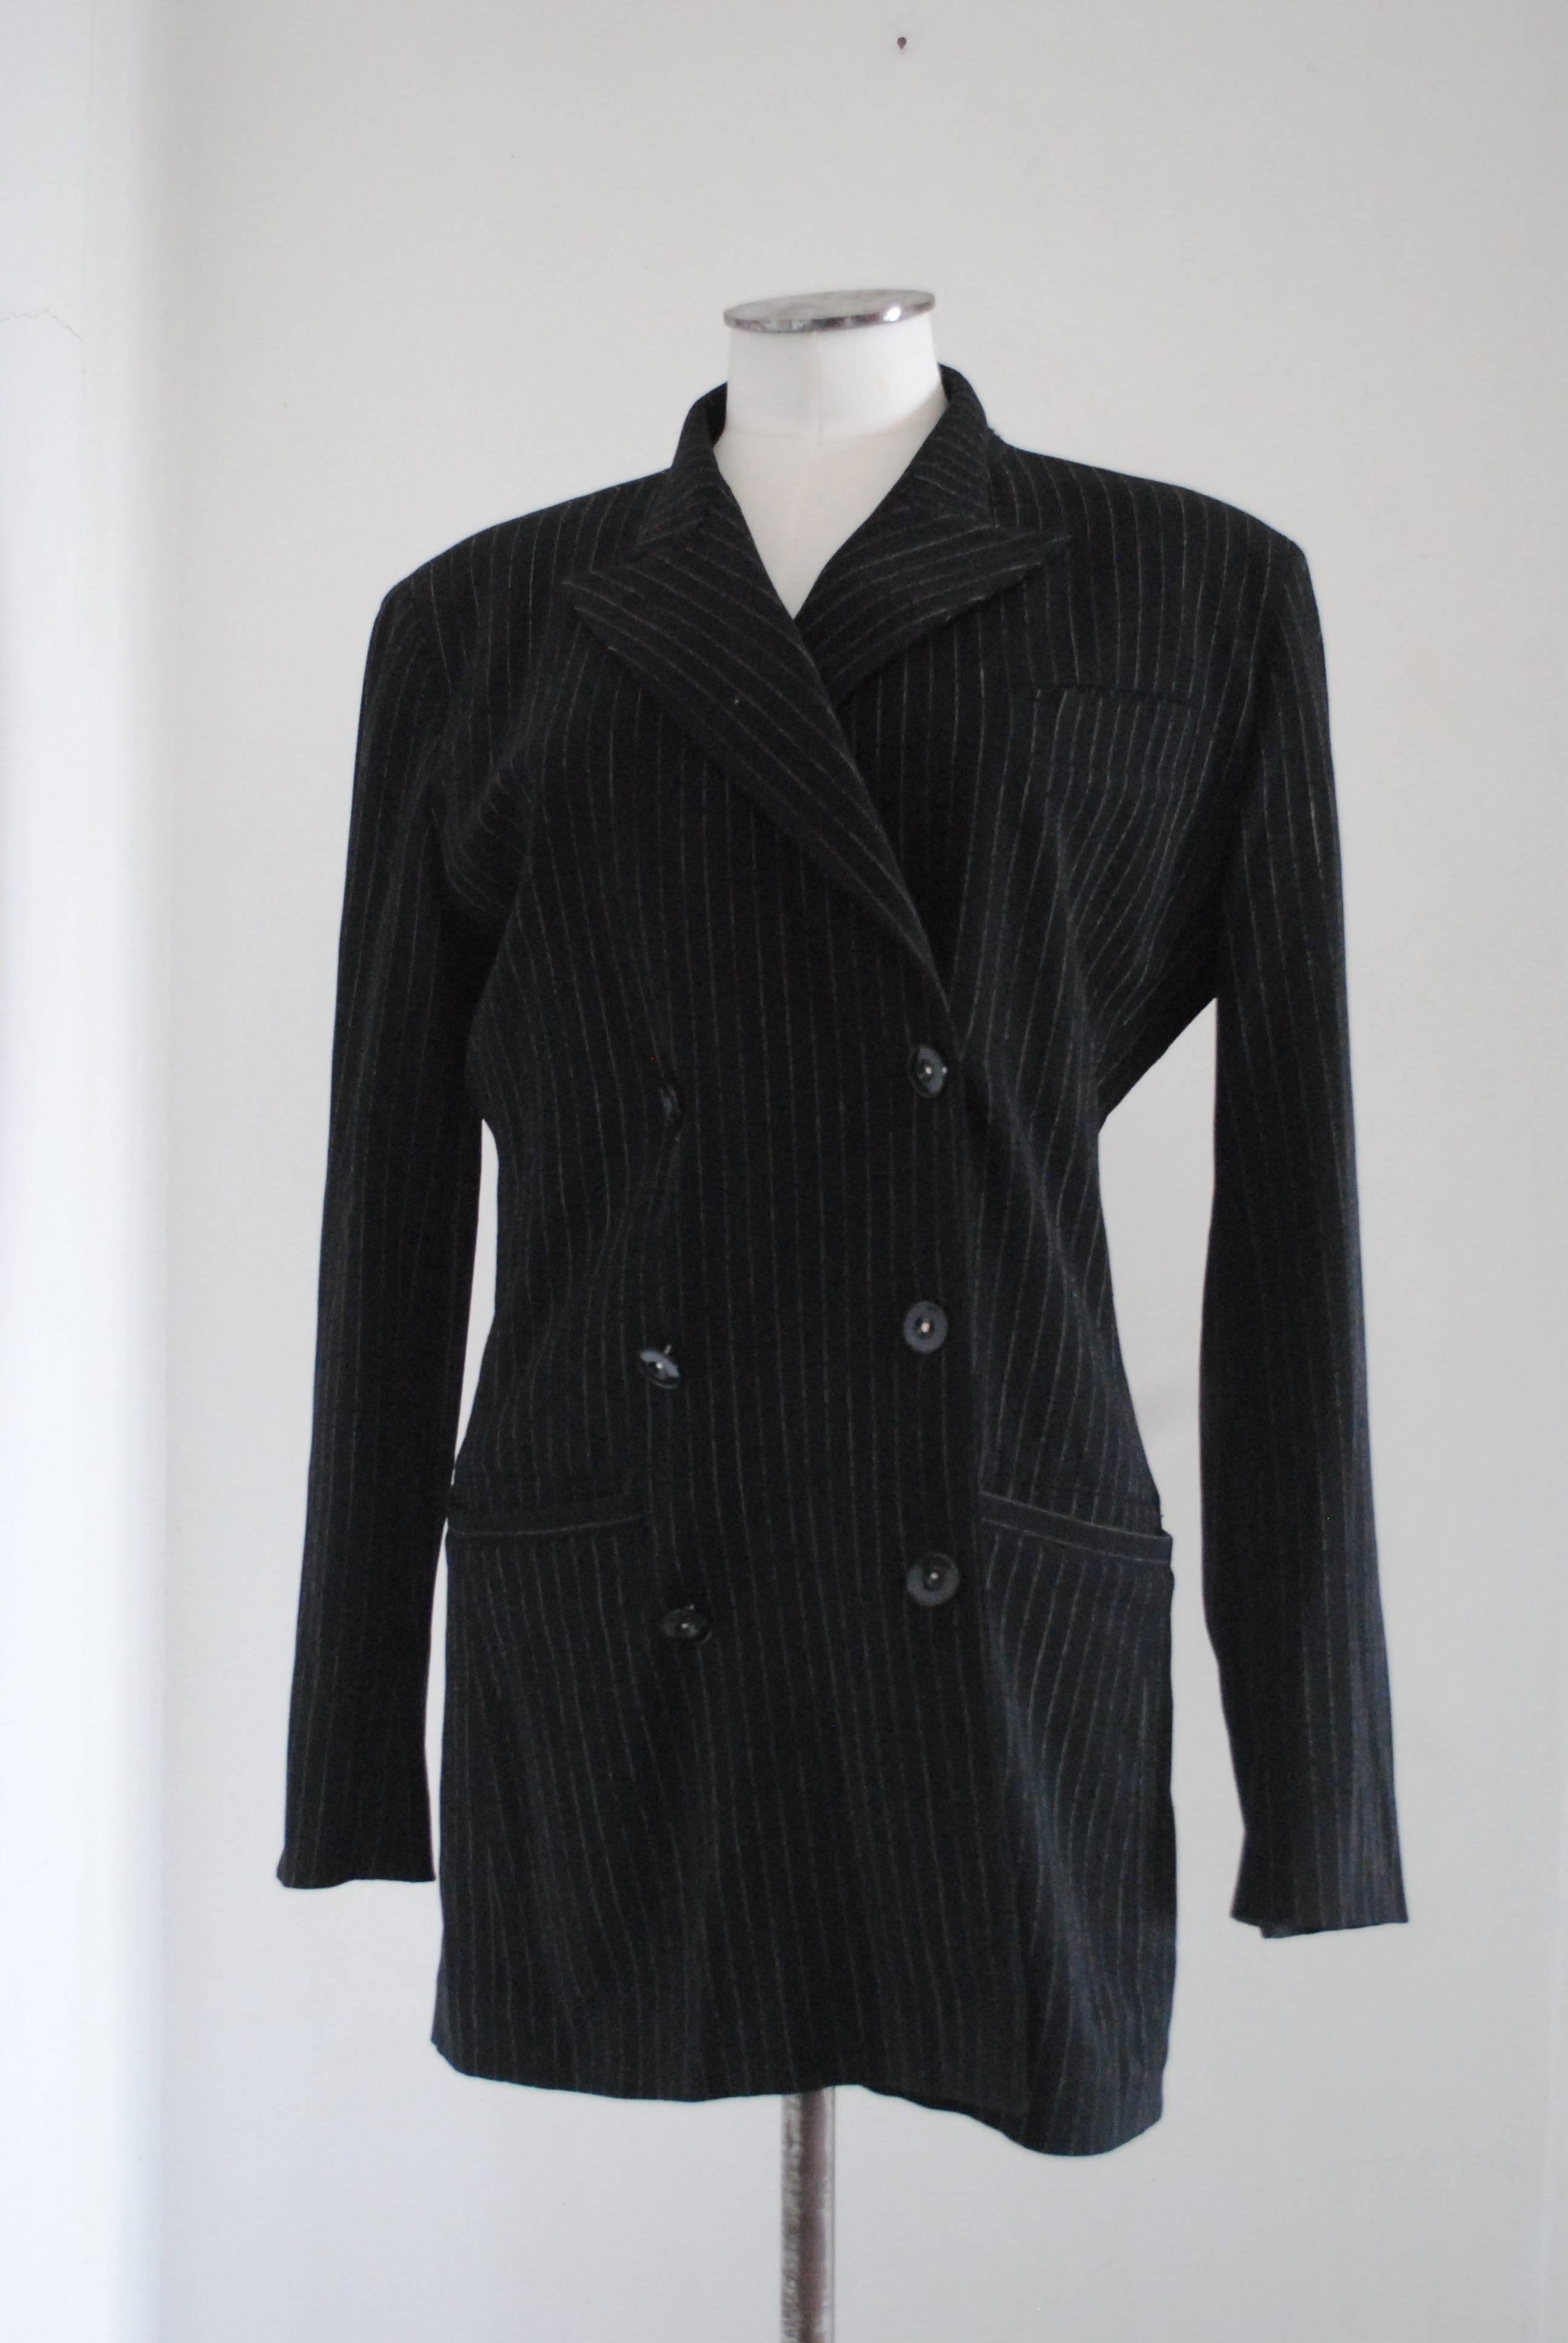 Jean Paul Gaultier Femme Black Stripes Jacket 

totally made in italy in italian size range 44

Composition: Acily and others